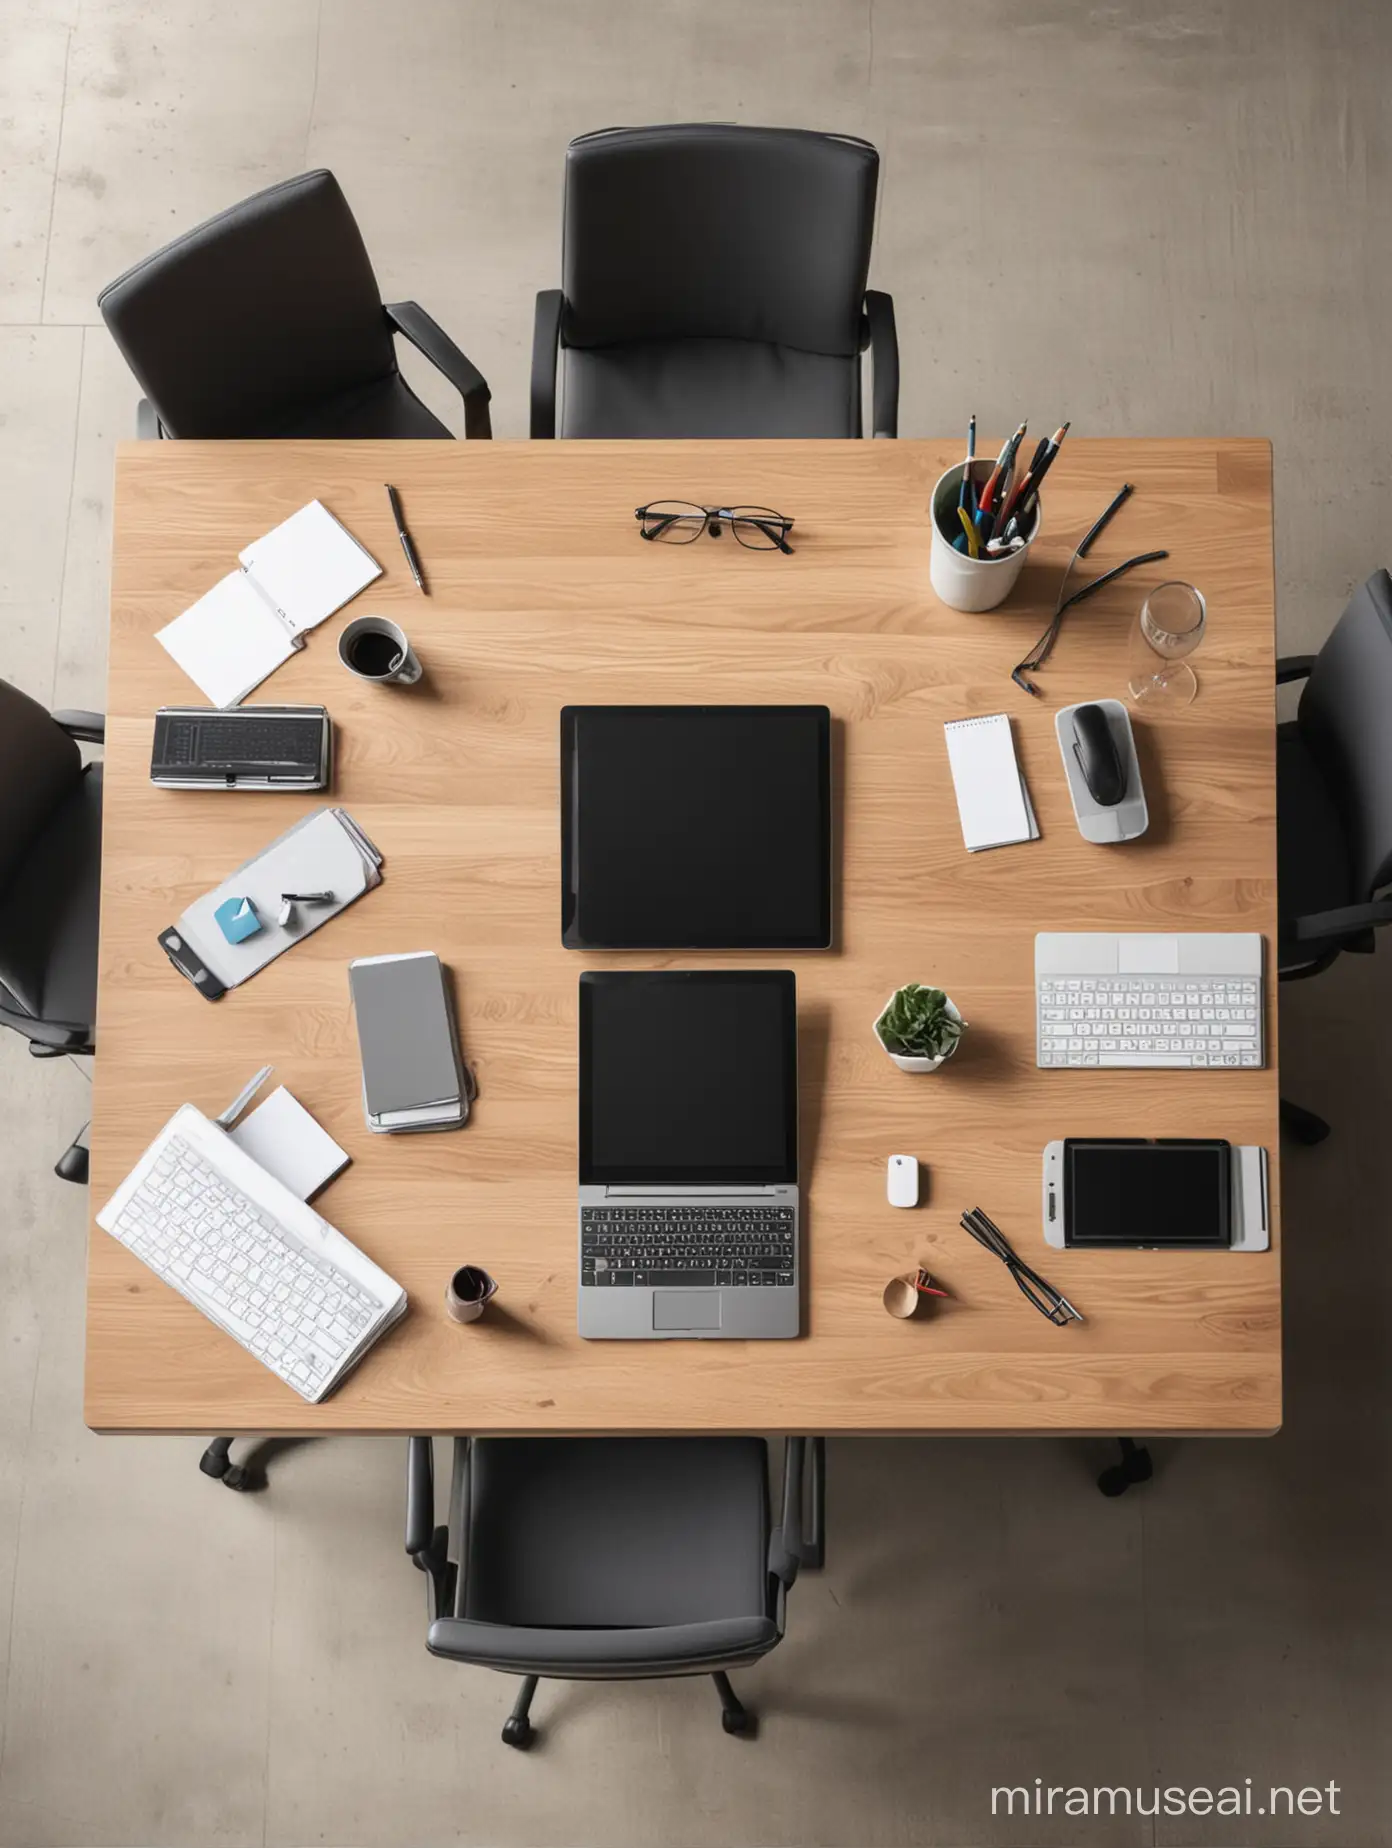 Modern Business Meeting Table with Office Equipment and Communication Tools